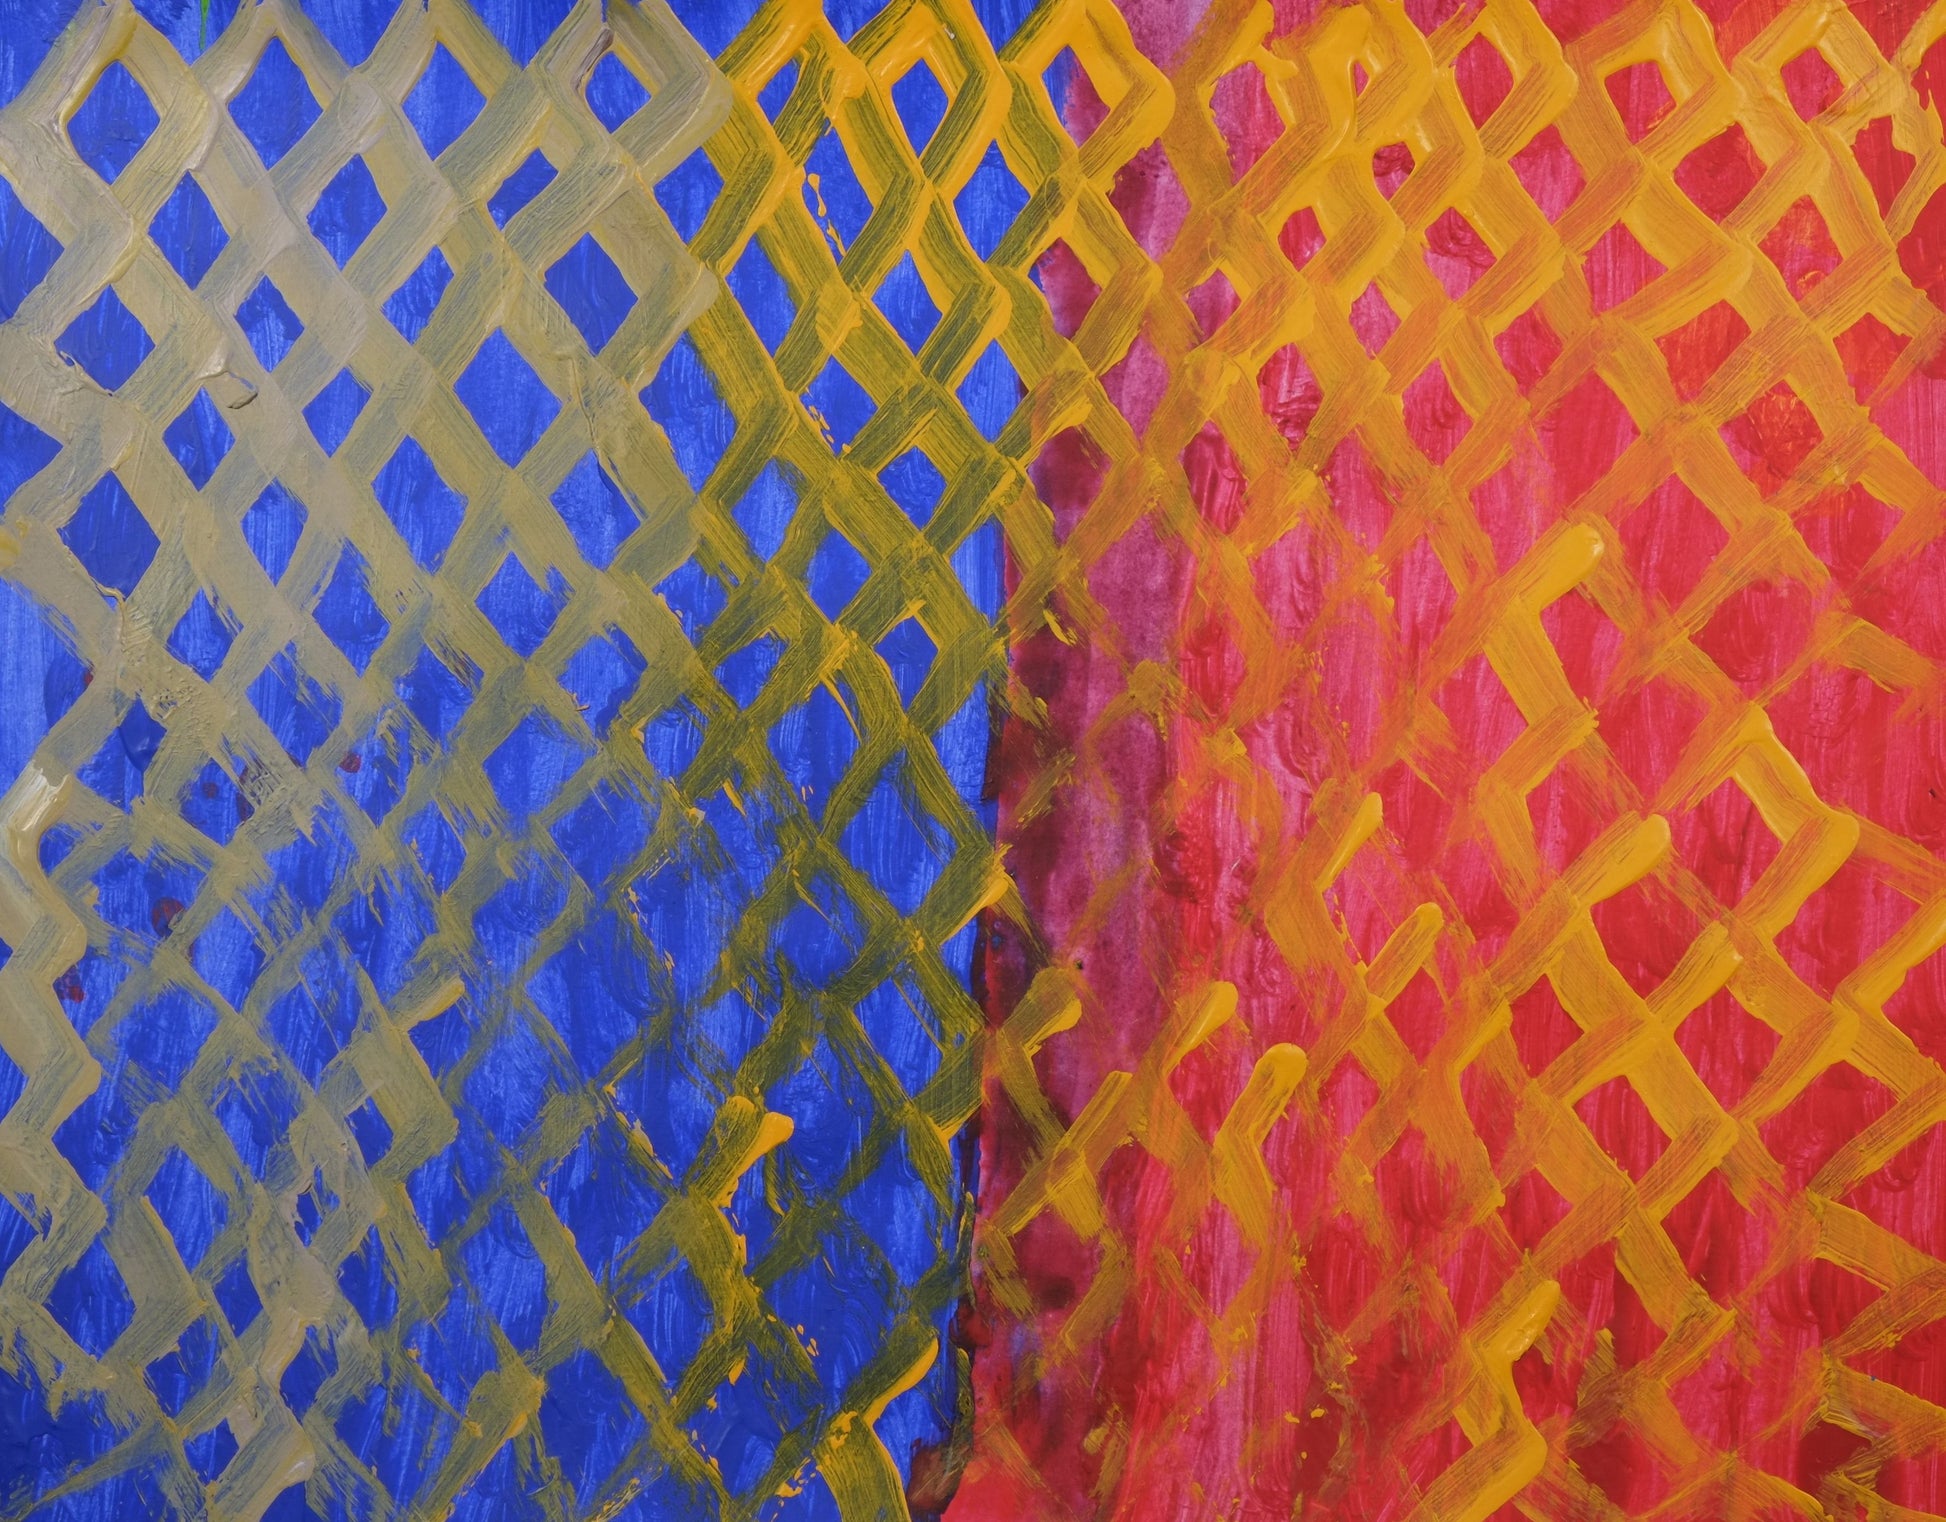 Acrylic on paper artwork depicting blue and red vertical blocks with yellow lattice overlay